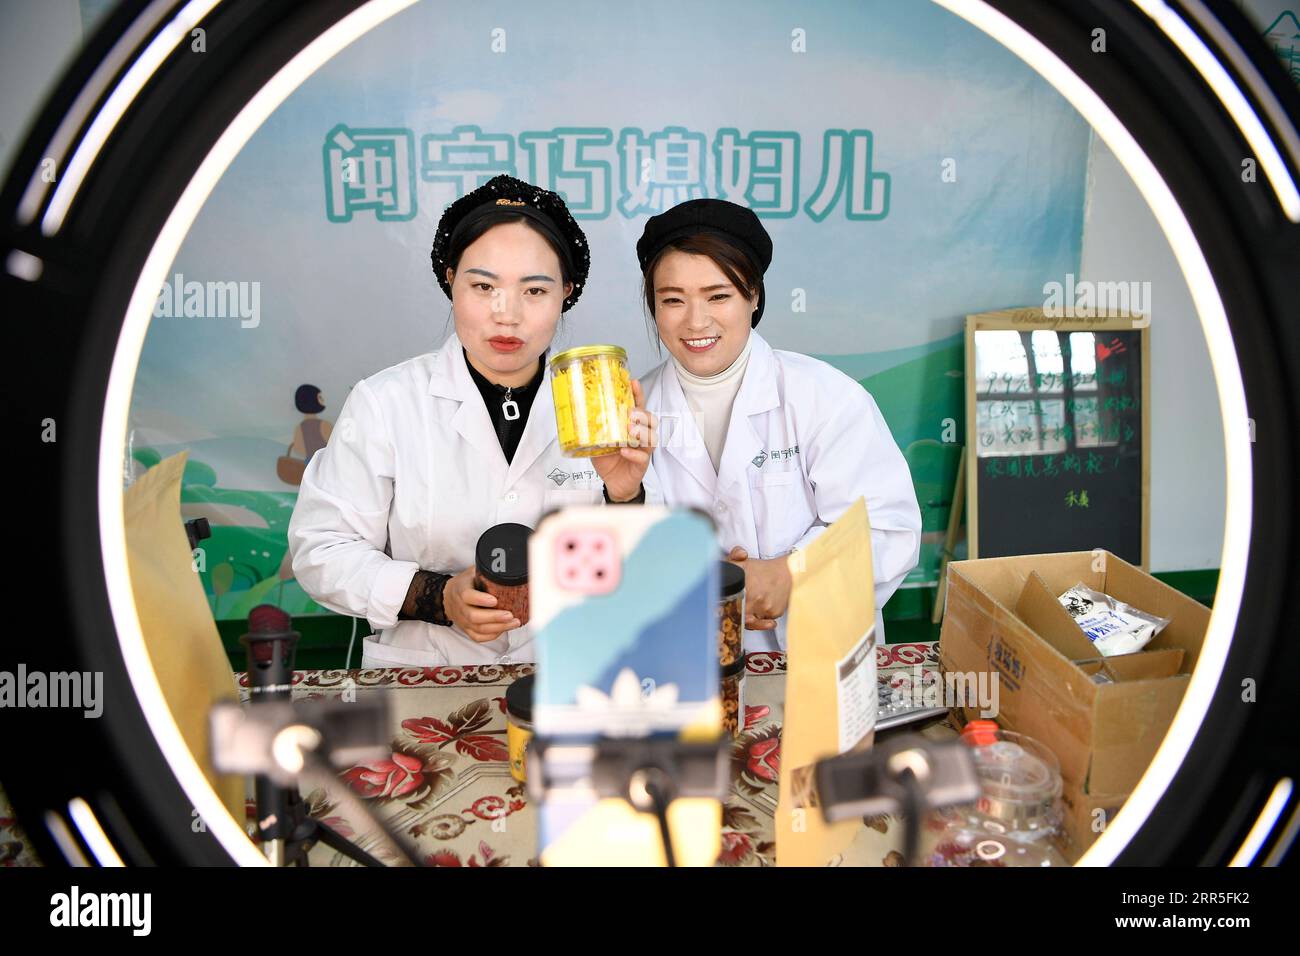 210105 -- YINCHUAN, Jan. 5, 2021 -- Hai Yan L and Ma Yan introduce products via livestreaming at Minning Hemei e-commerce poverty alleviation workshop in Yuanlong Village in Minning Township in Yinchuan, northwest China s Ningxia Hui Autonomous Region, Nov. 11, 2020. Xihaigu, one of China s most impoverished areas located in Ningxia, saw its last impoverished county removed from the national poverty list on Nov. 16, 2020. Over 60,000 farmers in Xihaigu have been relocated to Minning Township, which has converted from a town in Gobi desert to a modernized ecological relocation demonstration tow Stock Photo